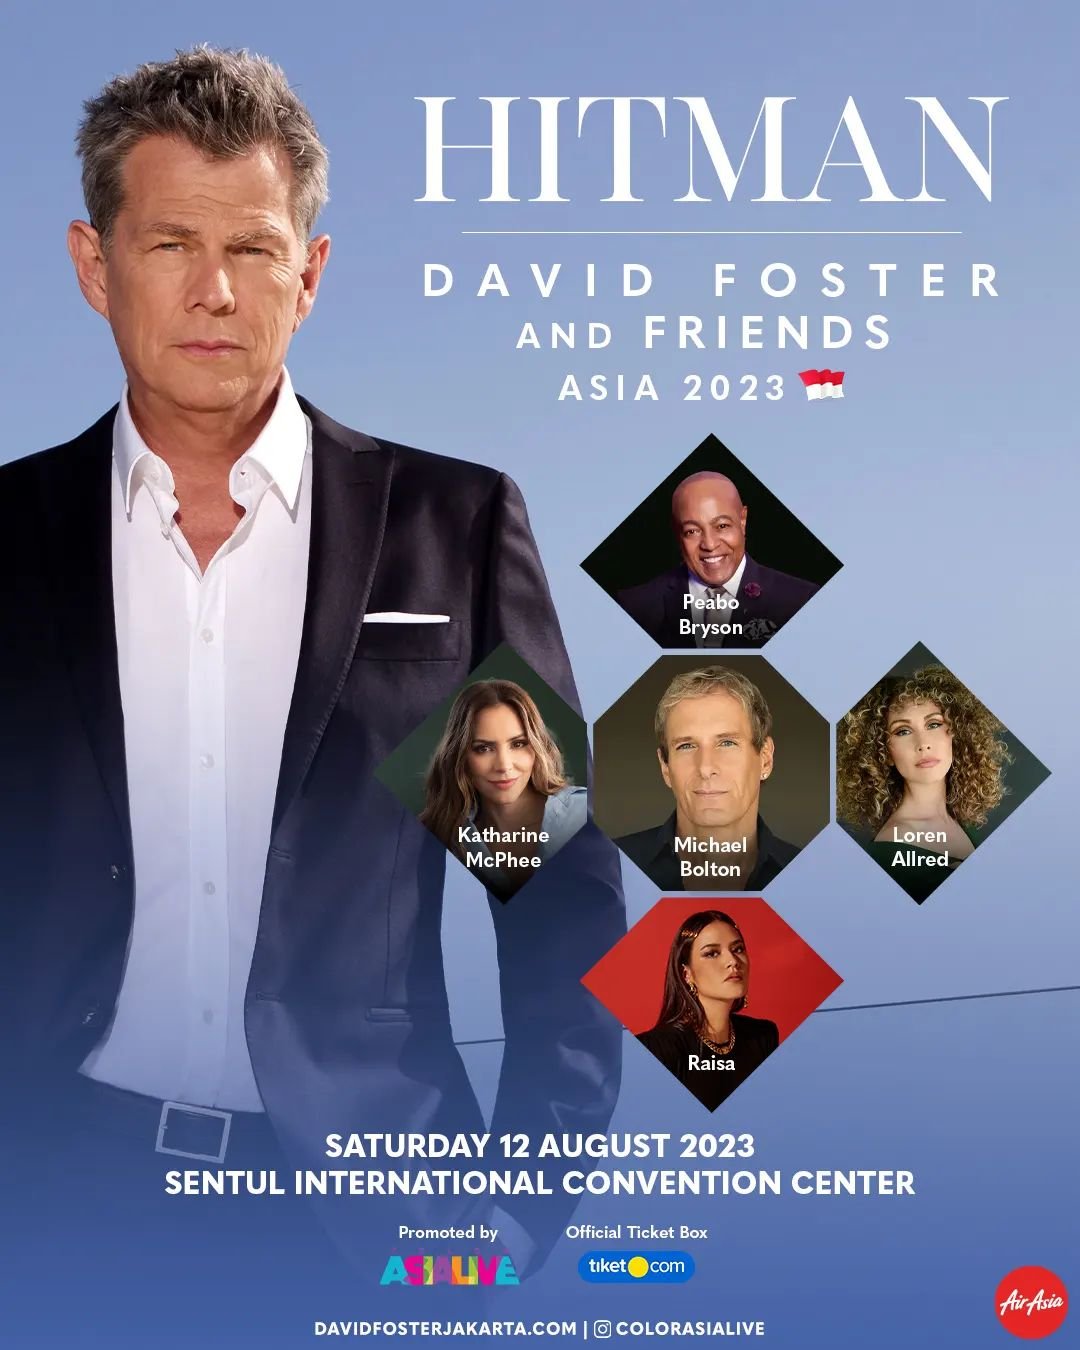 David Foster & Friends HITMAN Asia Tour 2023 What's New Indonesia